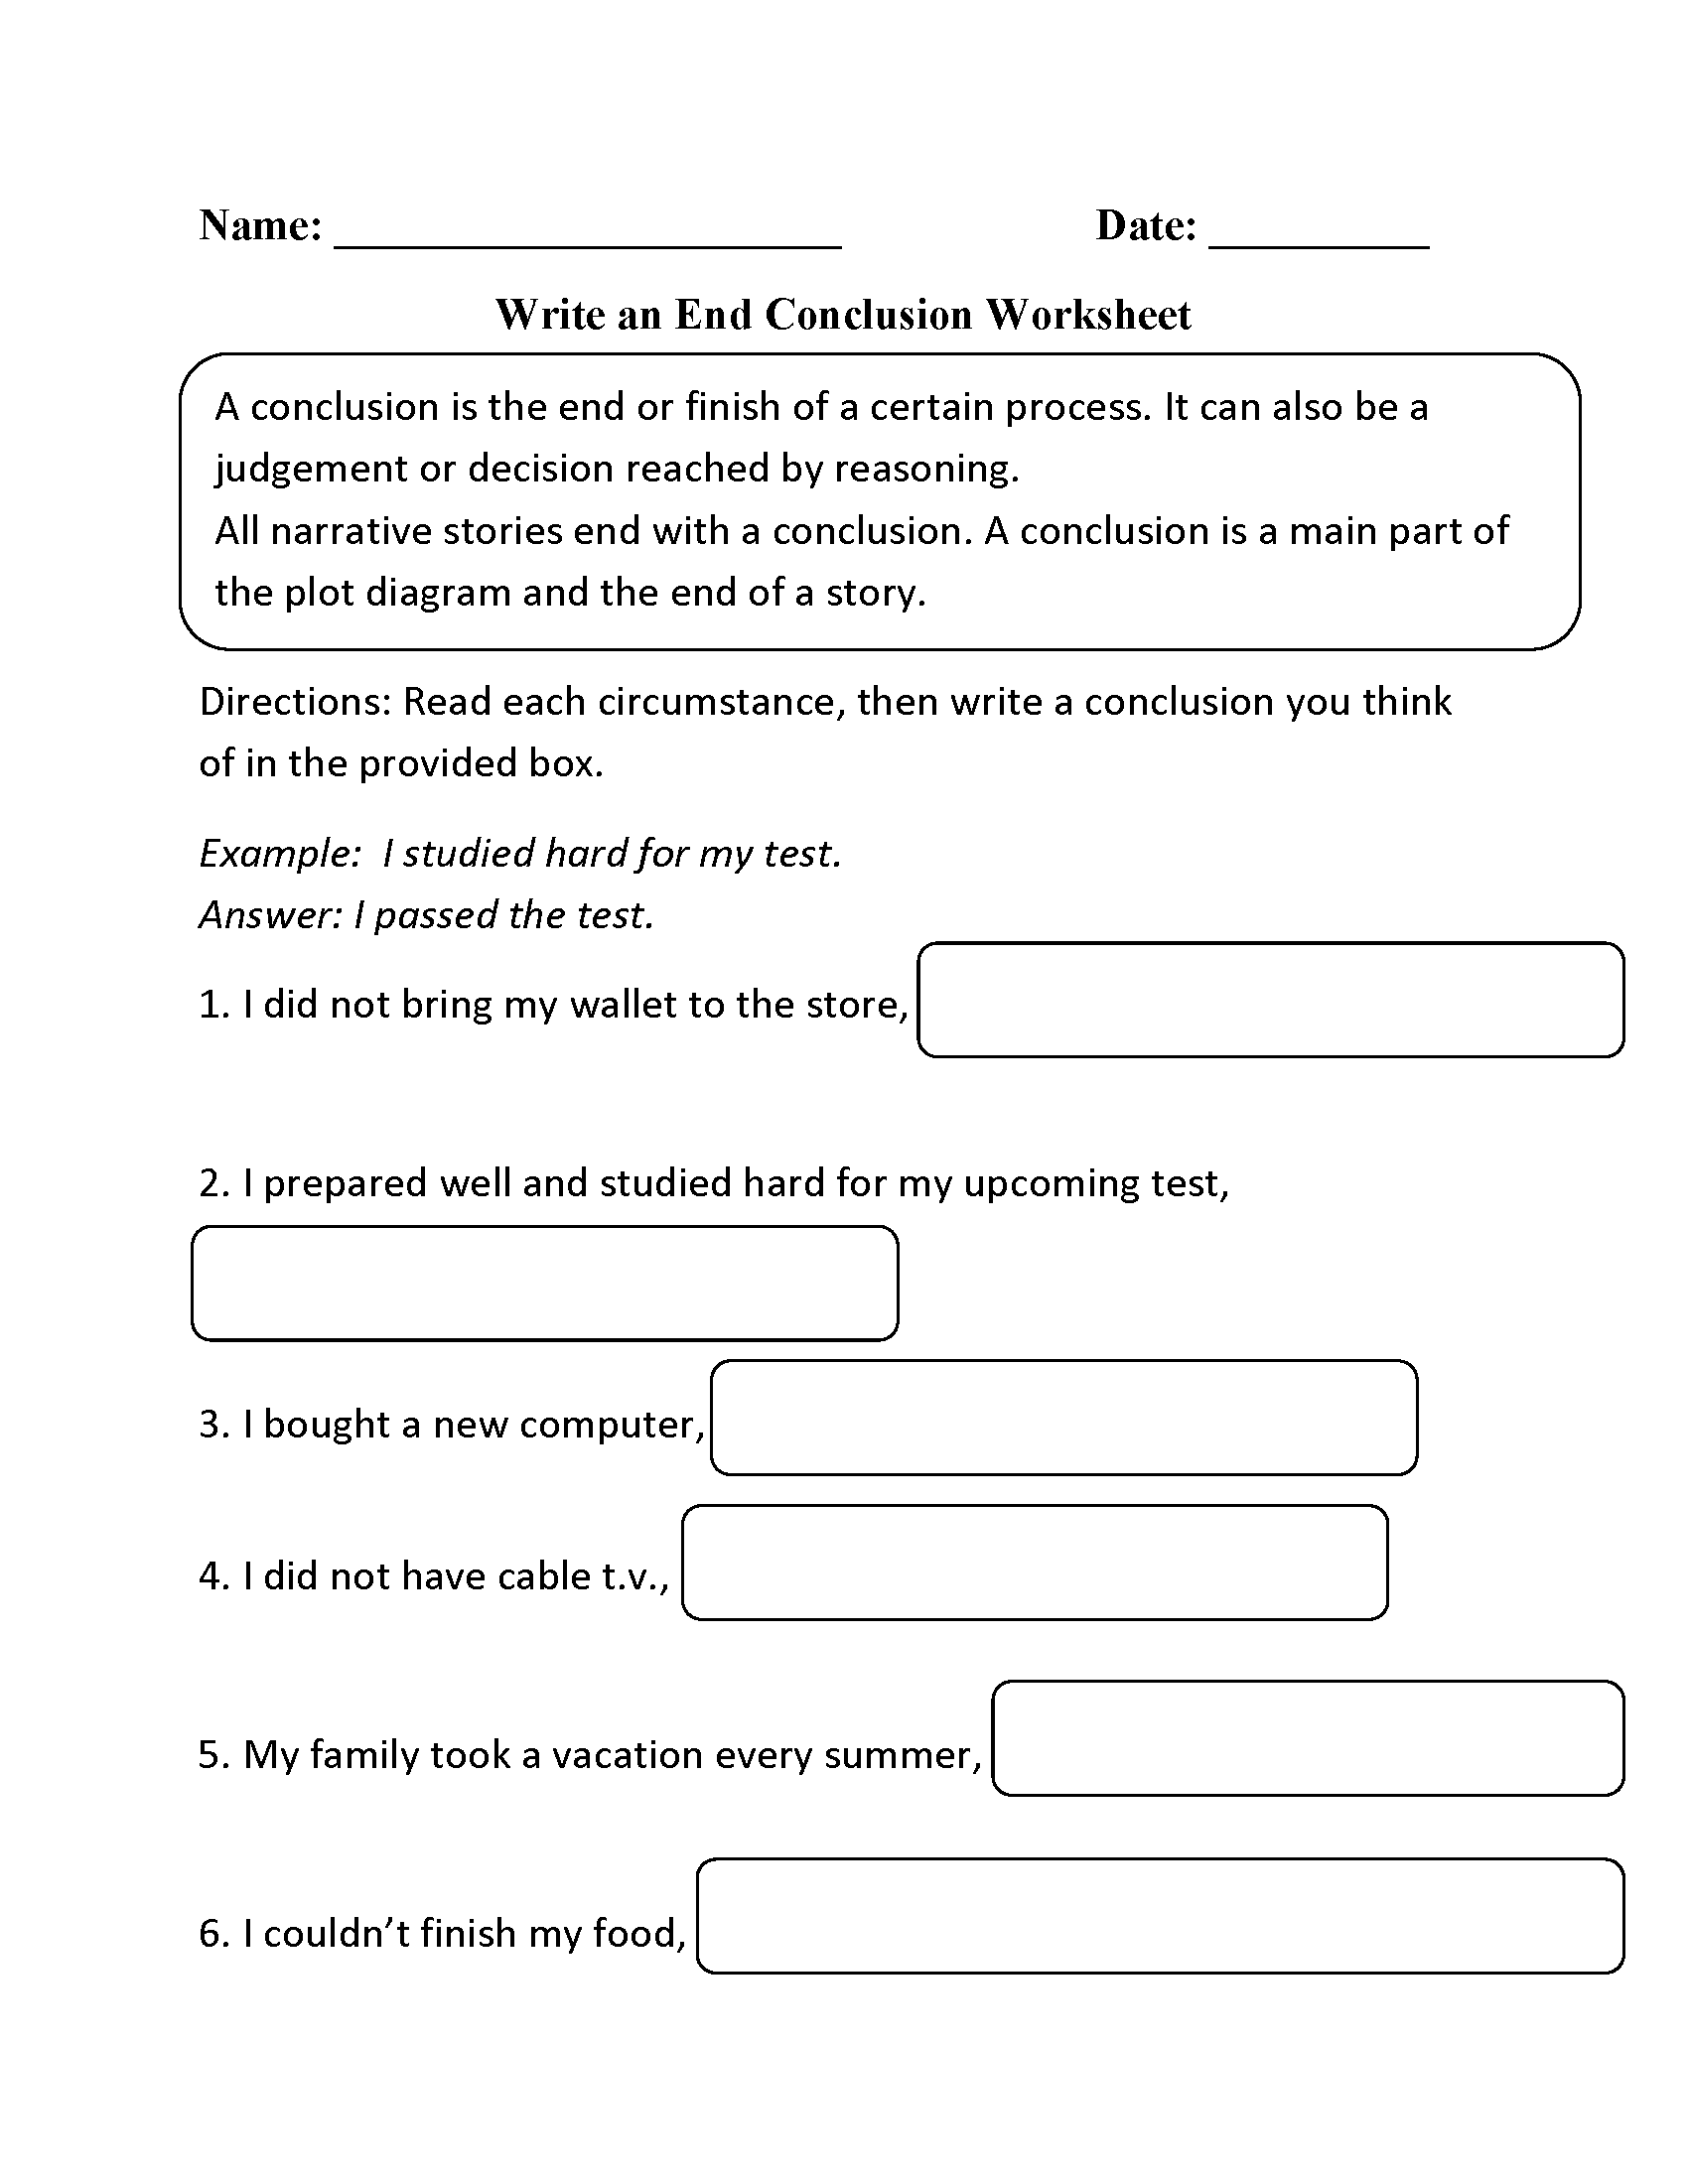 Drawing Conclusions Worksheets 5th Grade